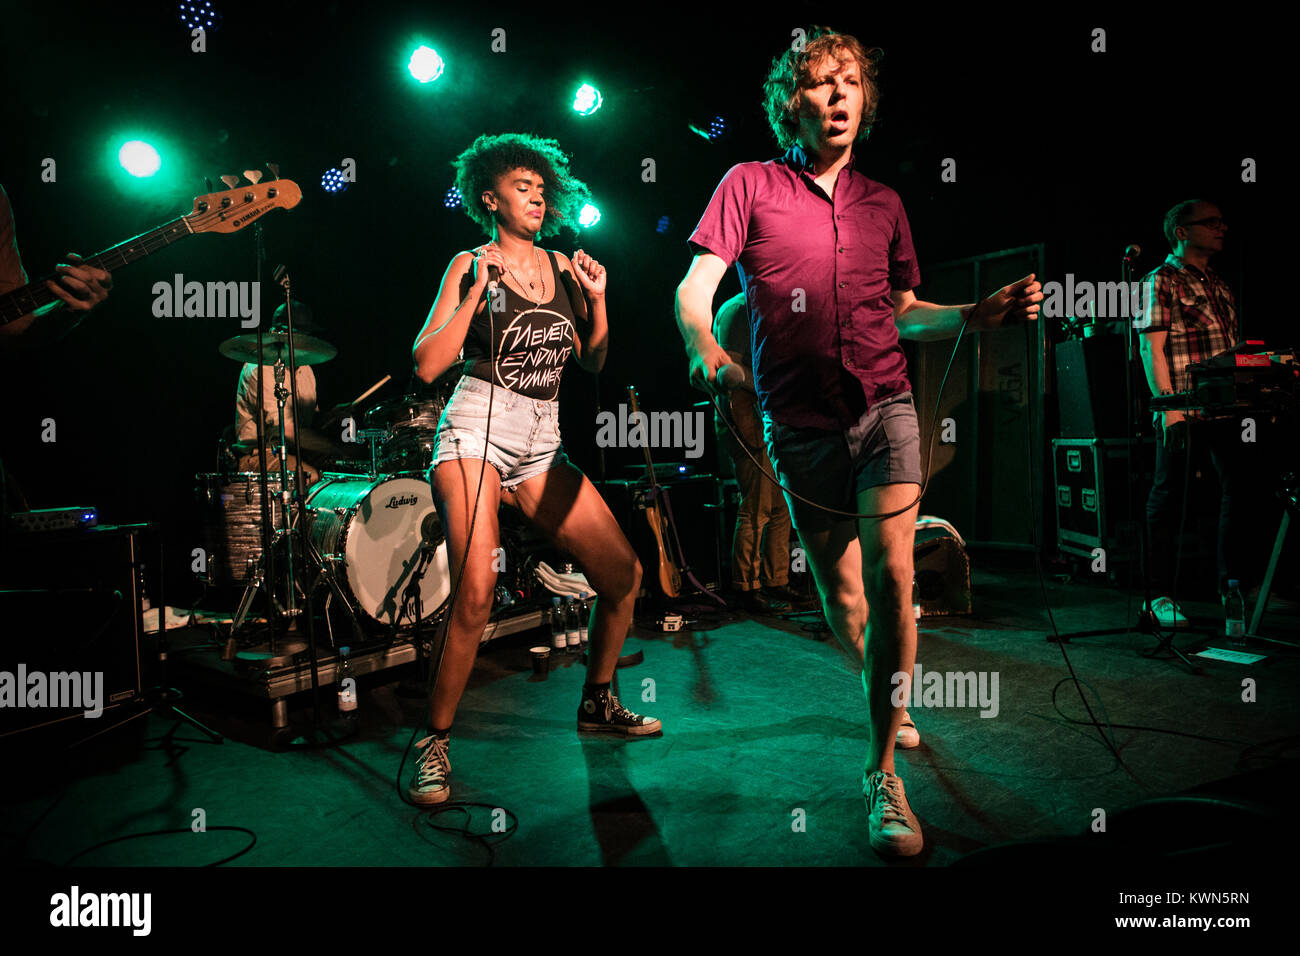 The American dance-punk band !!! (chk chk chk) performs a live concert at VEGA in Copenhagen. Here singer and songwriter Nic Offer is seen live on stage with guest singer Lea Lea. Denmark, 27/05 2017. Stock Photo